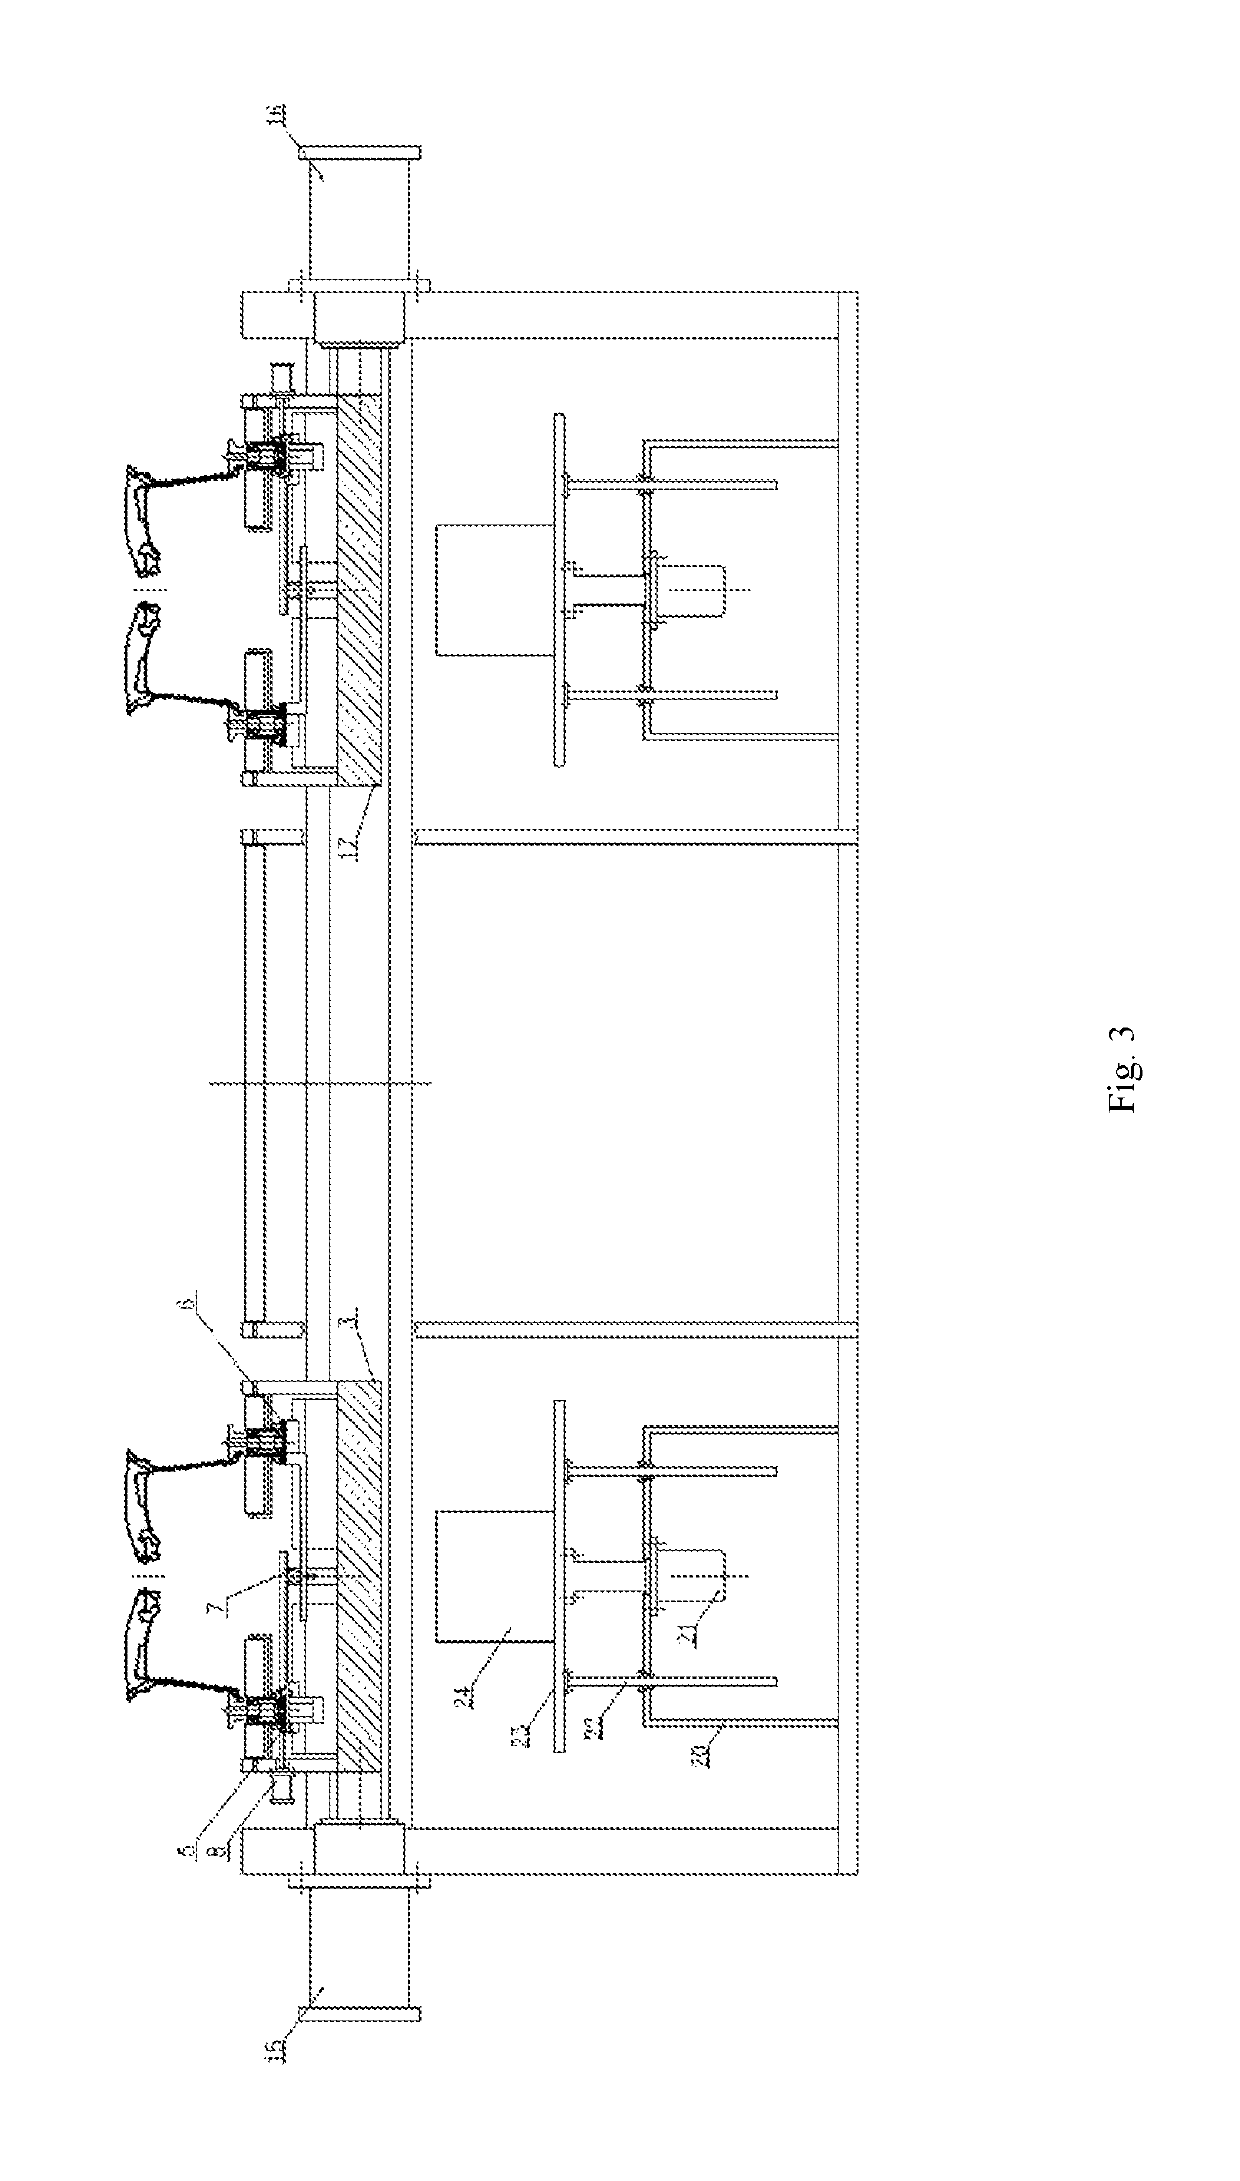 Wheel conveyance device or stations, wheel positioning and clamping system for a printing device